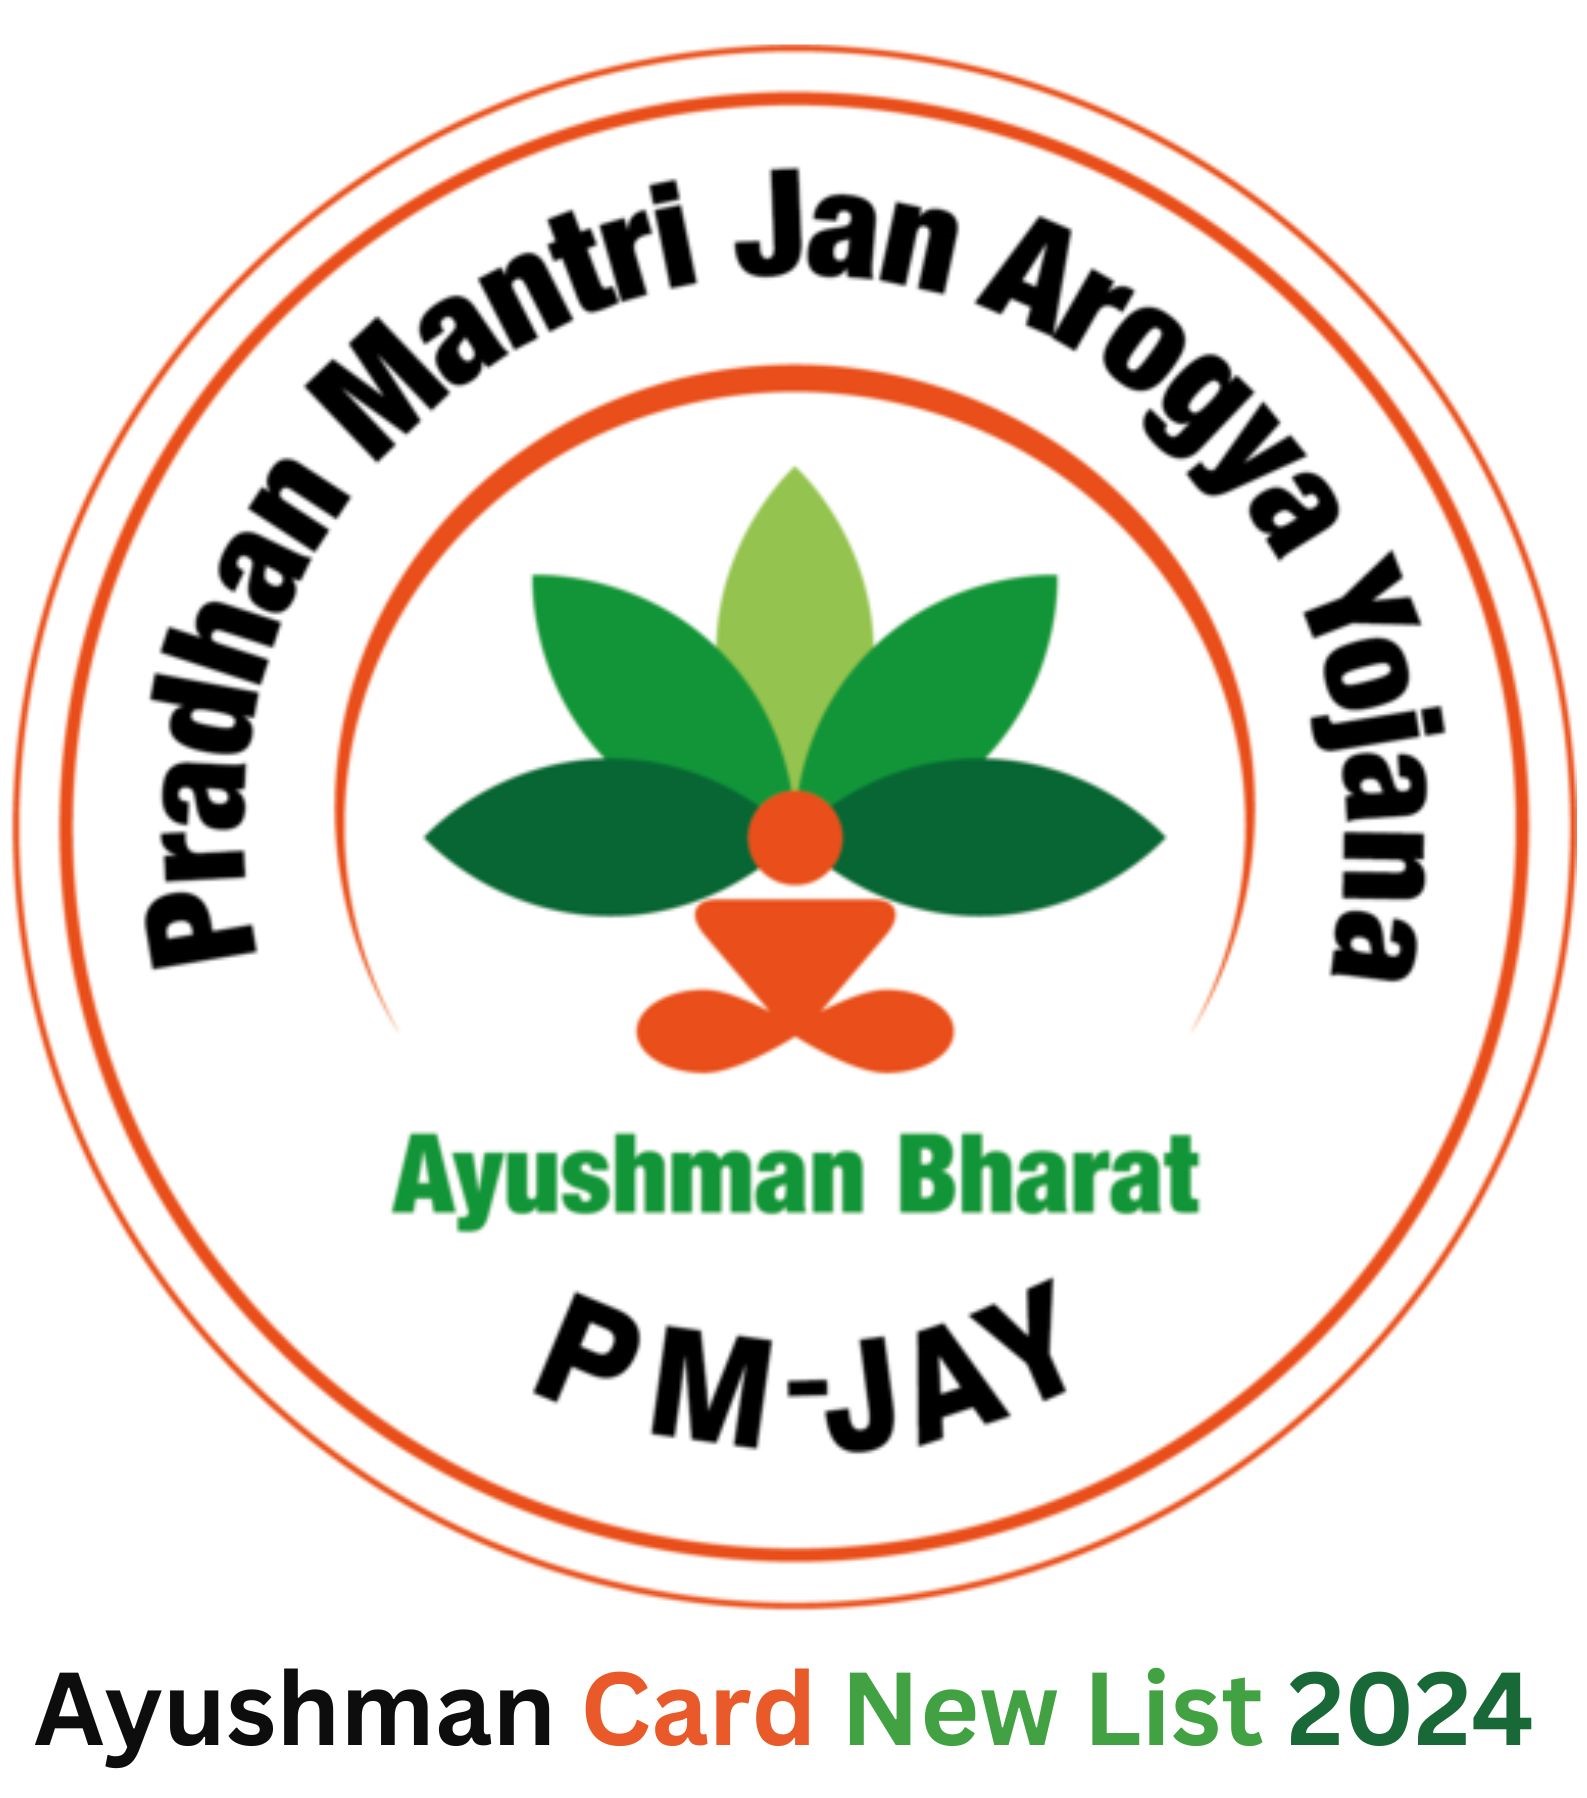 Ayushman Card New List 2024: How To Download And Check